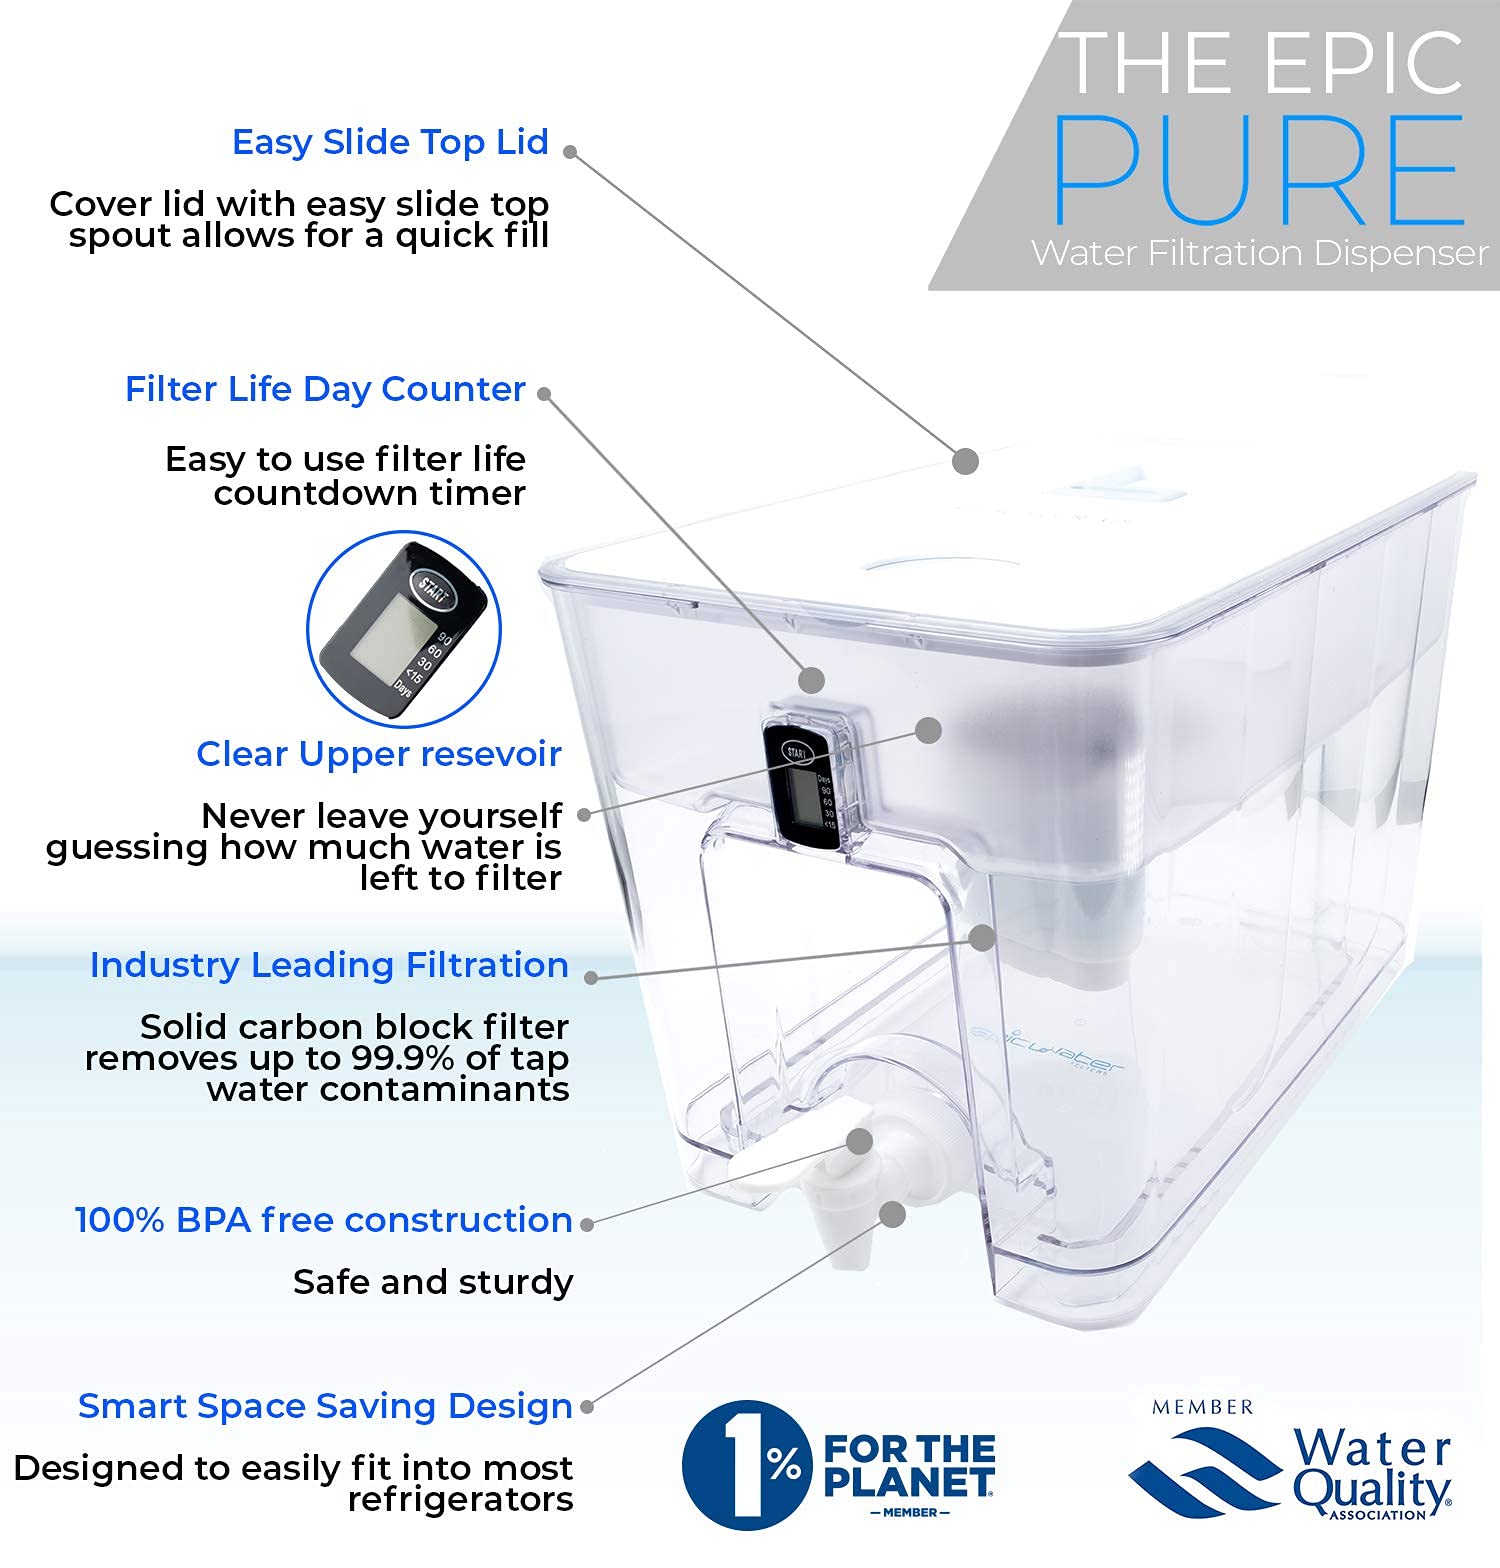 Epic Pure | Water Filter Dispenser Plus Extra Filter for Drinking Water | 10 Cup | 2 x 150 Gallon Long Last Filters | Removes Fluoride, Chlorine, Lead | Water Purification |